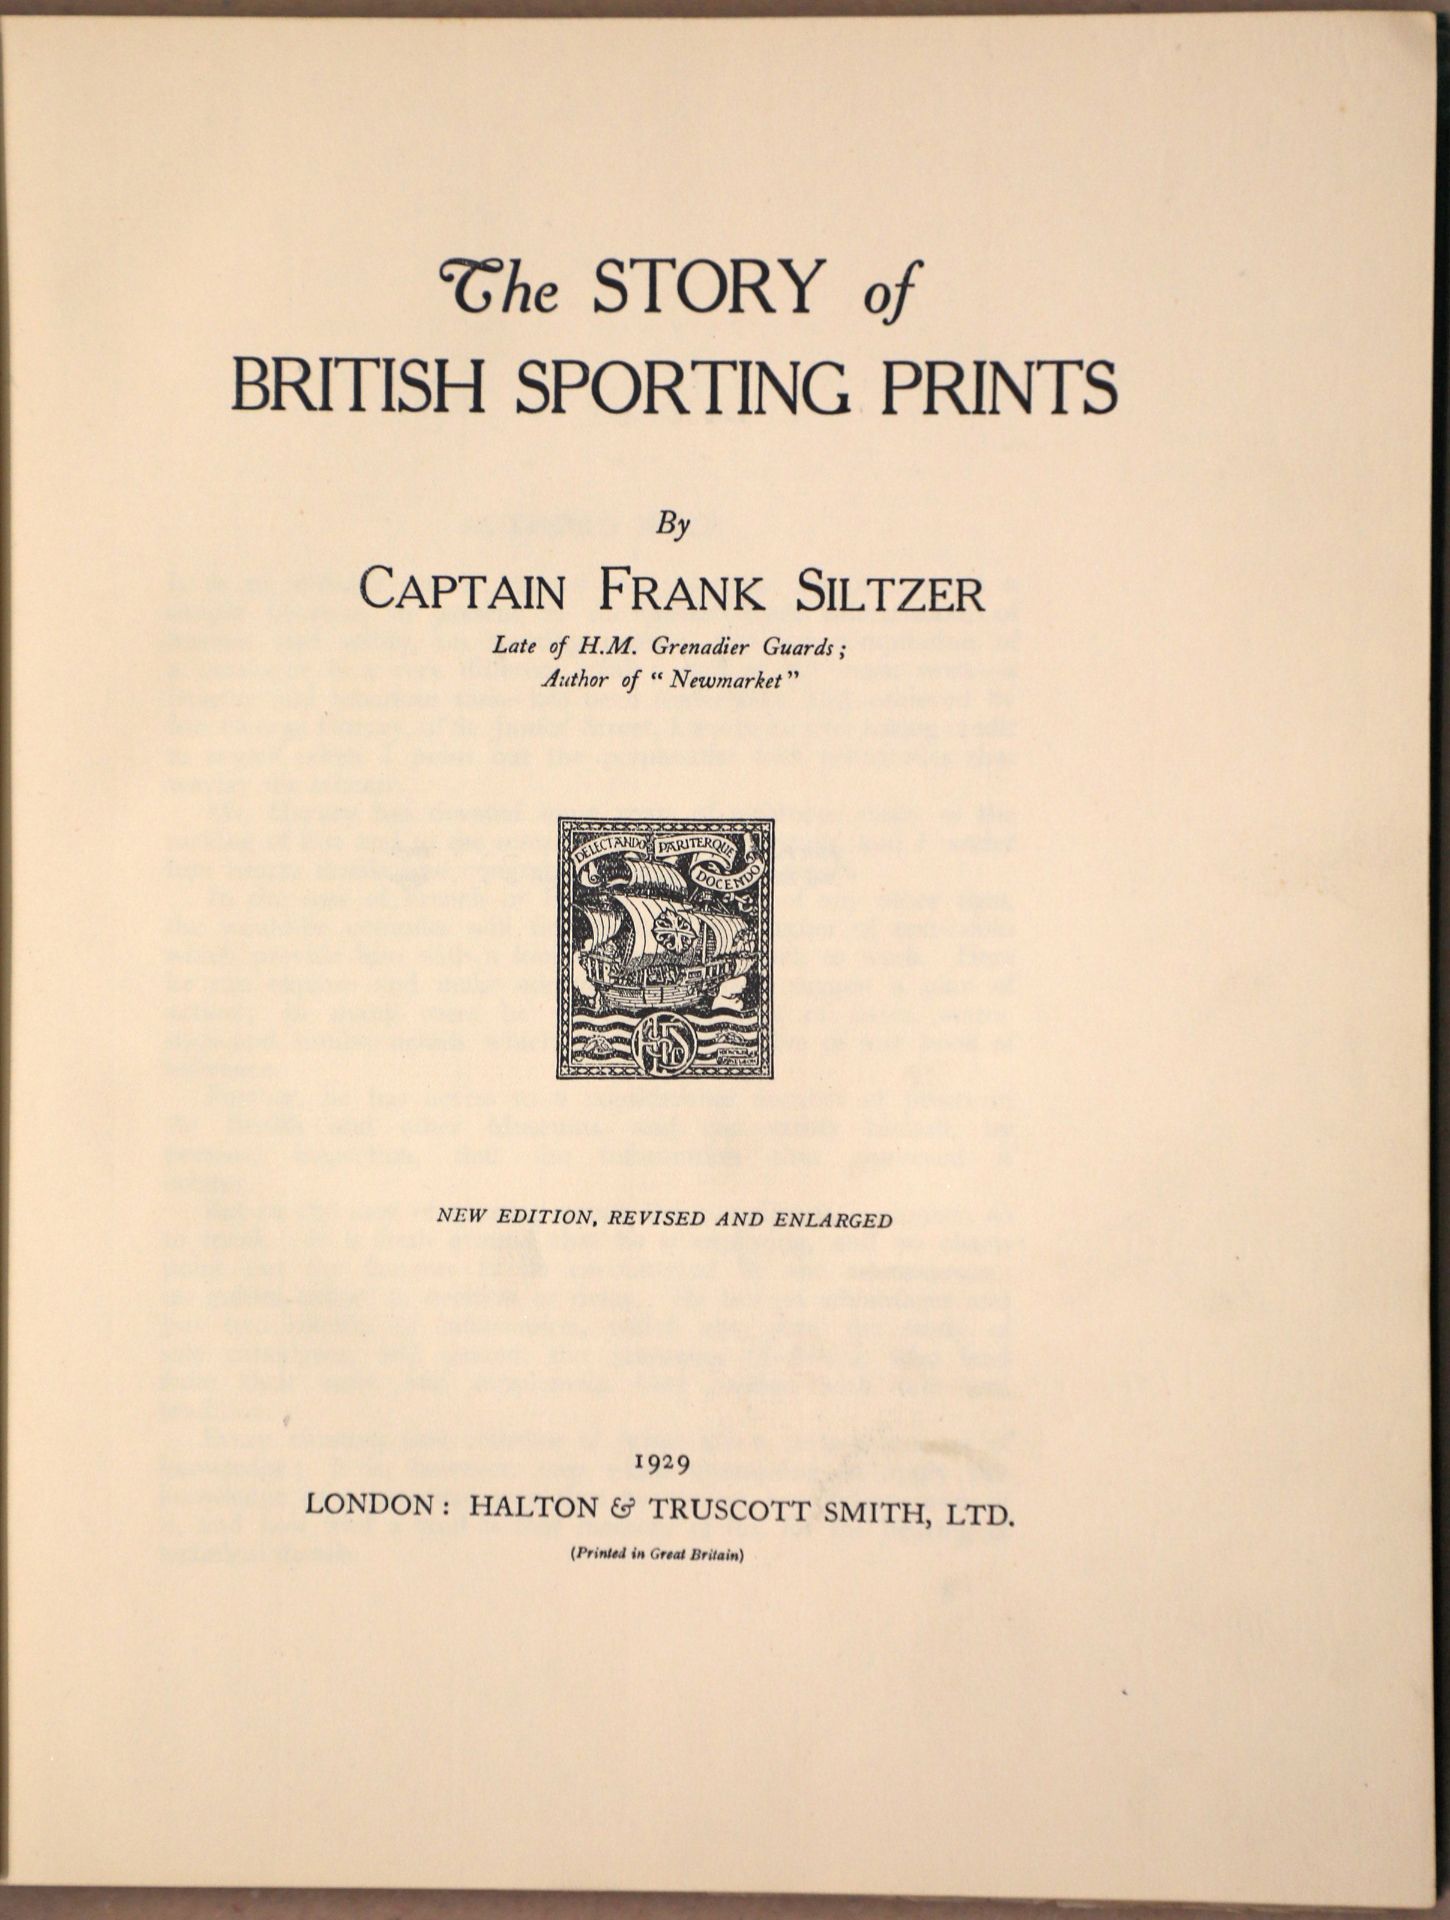 The Story of BRITISH SPORTING PRINTS, Captain Frank Siltzer, New Edition, 4to, cloth, t.e.g. - Image 3 of 14